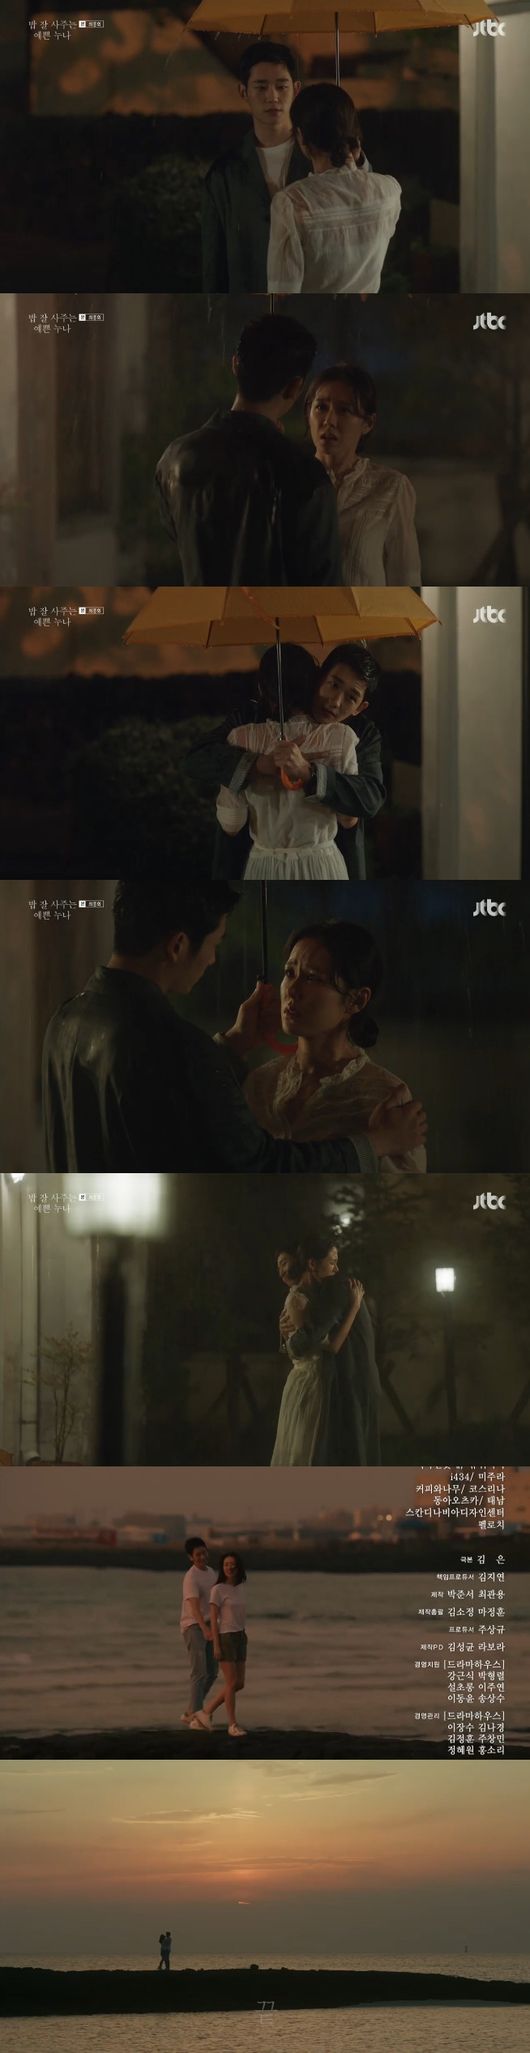 The ending ended with the opening of Bob-savvy Sister. Son Ye-jin and Jung Hae In met again in Jeju, but no one can guarantee after that.Did they live happily for a long time?In JTBCs Beautiful Sister Who Buys Bob Good, which aired on the 19th, Jin-ah (Son Ye-jin) and Jun-hee (Jung Hae In) were reunited after the separation.The pretty sister who bought rice well, which made viewers cry and laugh for 8 weeks, ended with Jin-ah and Jun-hee starting to love again.Many people wondered what the end of the love affair between the two would be, but Drama was finished with the beginning, not the end of the two.After a few years of separation, Jina and Junhee, who met again, were reviving and suffering the feelings for each other that they had forgotten.The two still have a lingering feeling for each other, but they have not easily started again.Jina broke up with her new boyfriend and quit the company and folded everything and went down to Jeju Island.Junhee tried to forget Jin-ah, but failed and went down to Jeju Island to find Jin-ah again.The pair, who met again at Jeju Island, eventually confirmed each others hearts and shared a hot hug.The love between Jin-ah and Jun-hee seems to be continuing again, but no one can know the end of it. The next day, we can break up again and the conflict with the family still exists.The pretty sister who buys rice well ended up drawing a realistic figure of two people rather than showing a beautiful finish like a fairy tale.I wonder if Jin-ah and Jun-hee continued to love in the face of the opposition of the family this time, or if they would have completely separated from the wall again.Capture the broadcast screen of Beauty Sisters who buy rice well